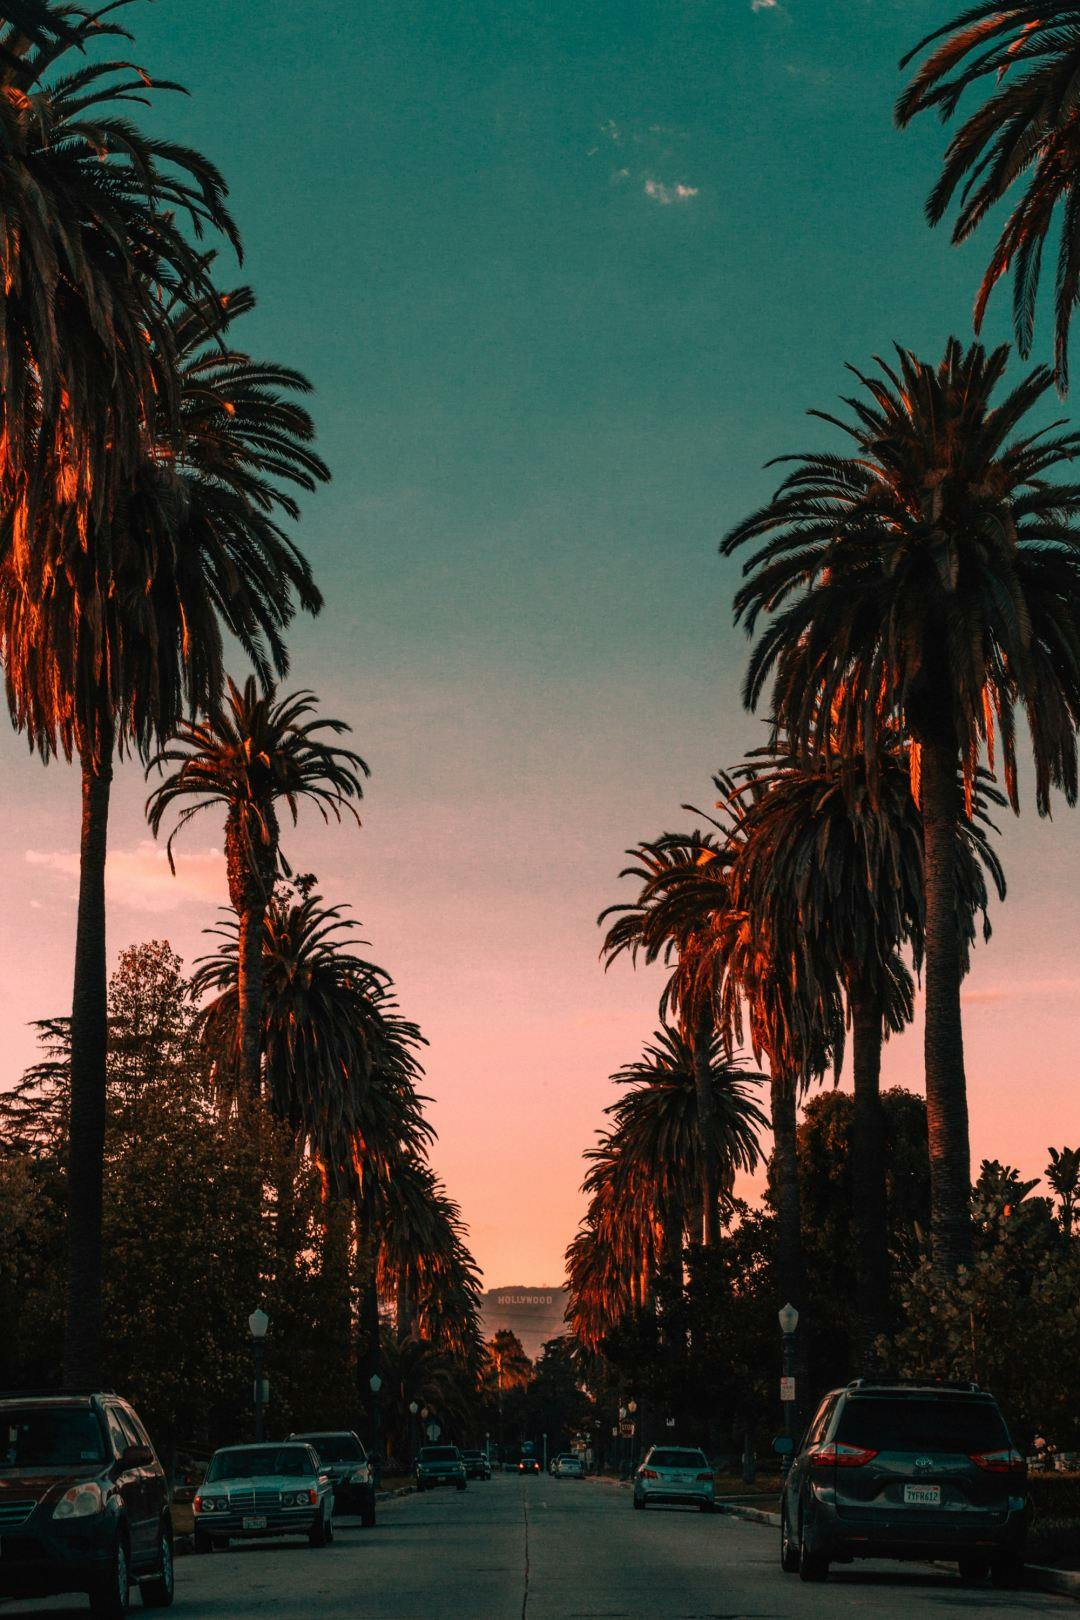 A Los Angeles street lined with palm trees